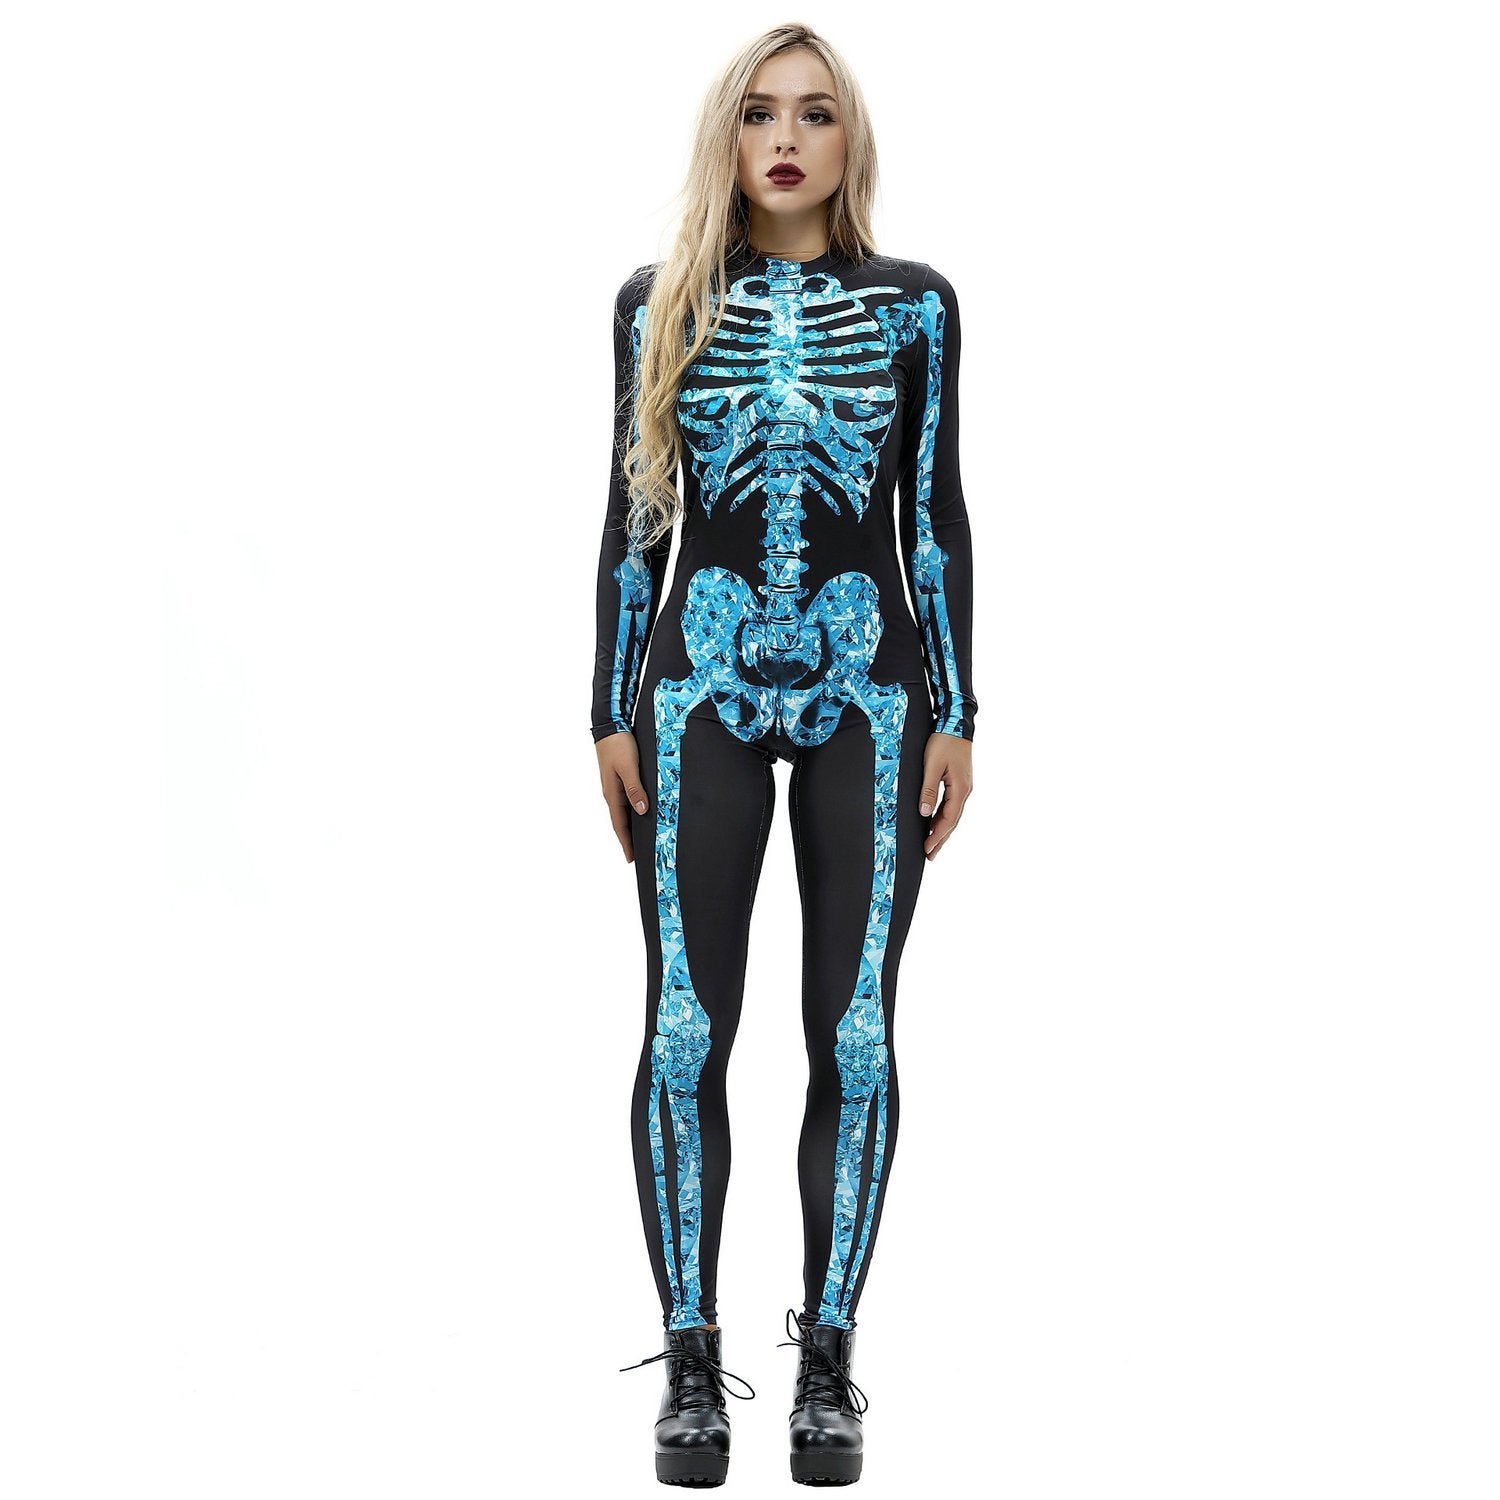 Halloween Skull Outfits Skeleton Cosplay Costume Jumpsuit for Women